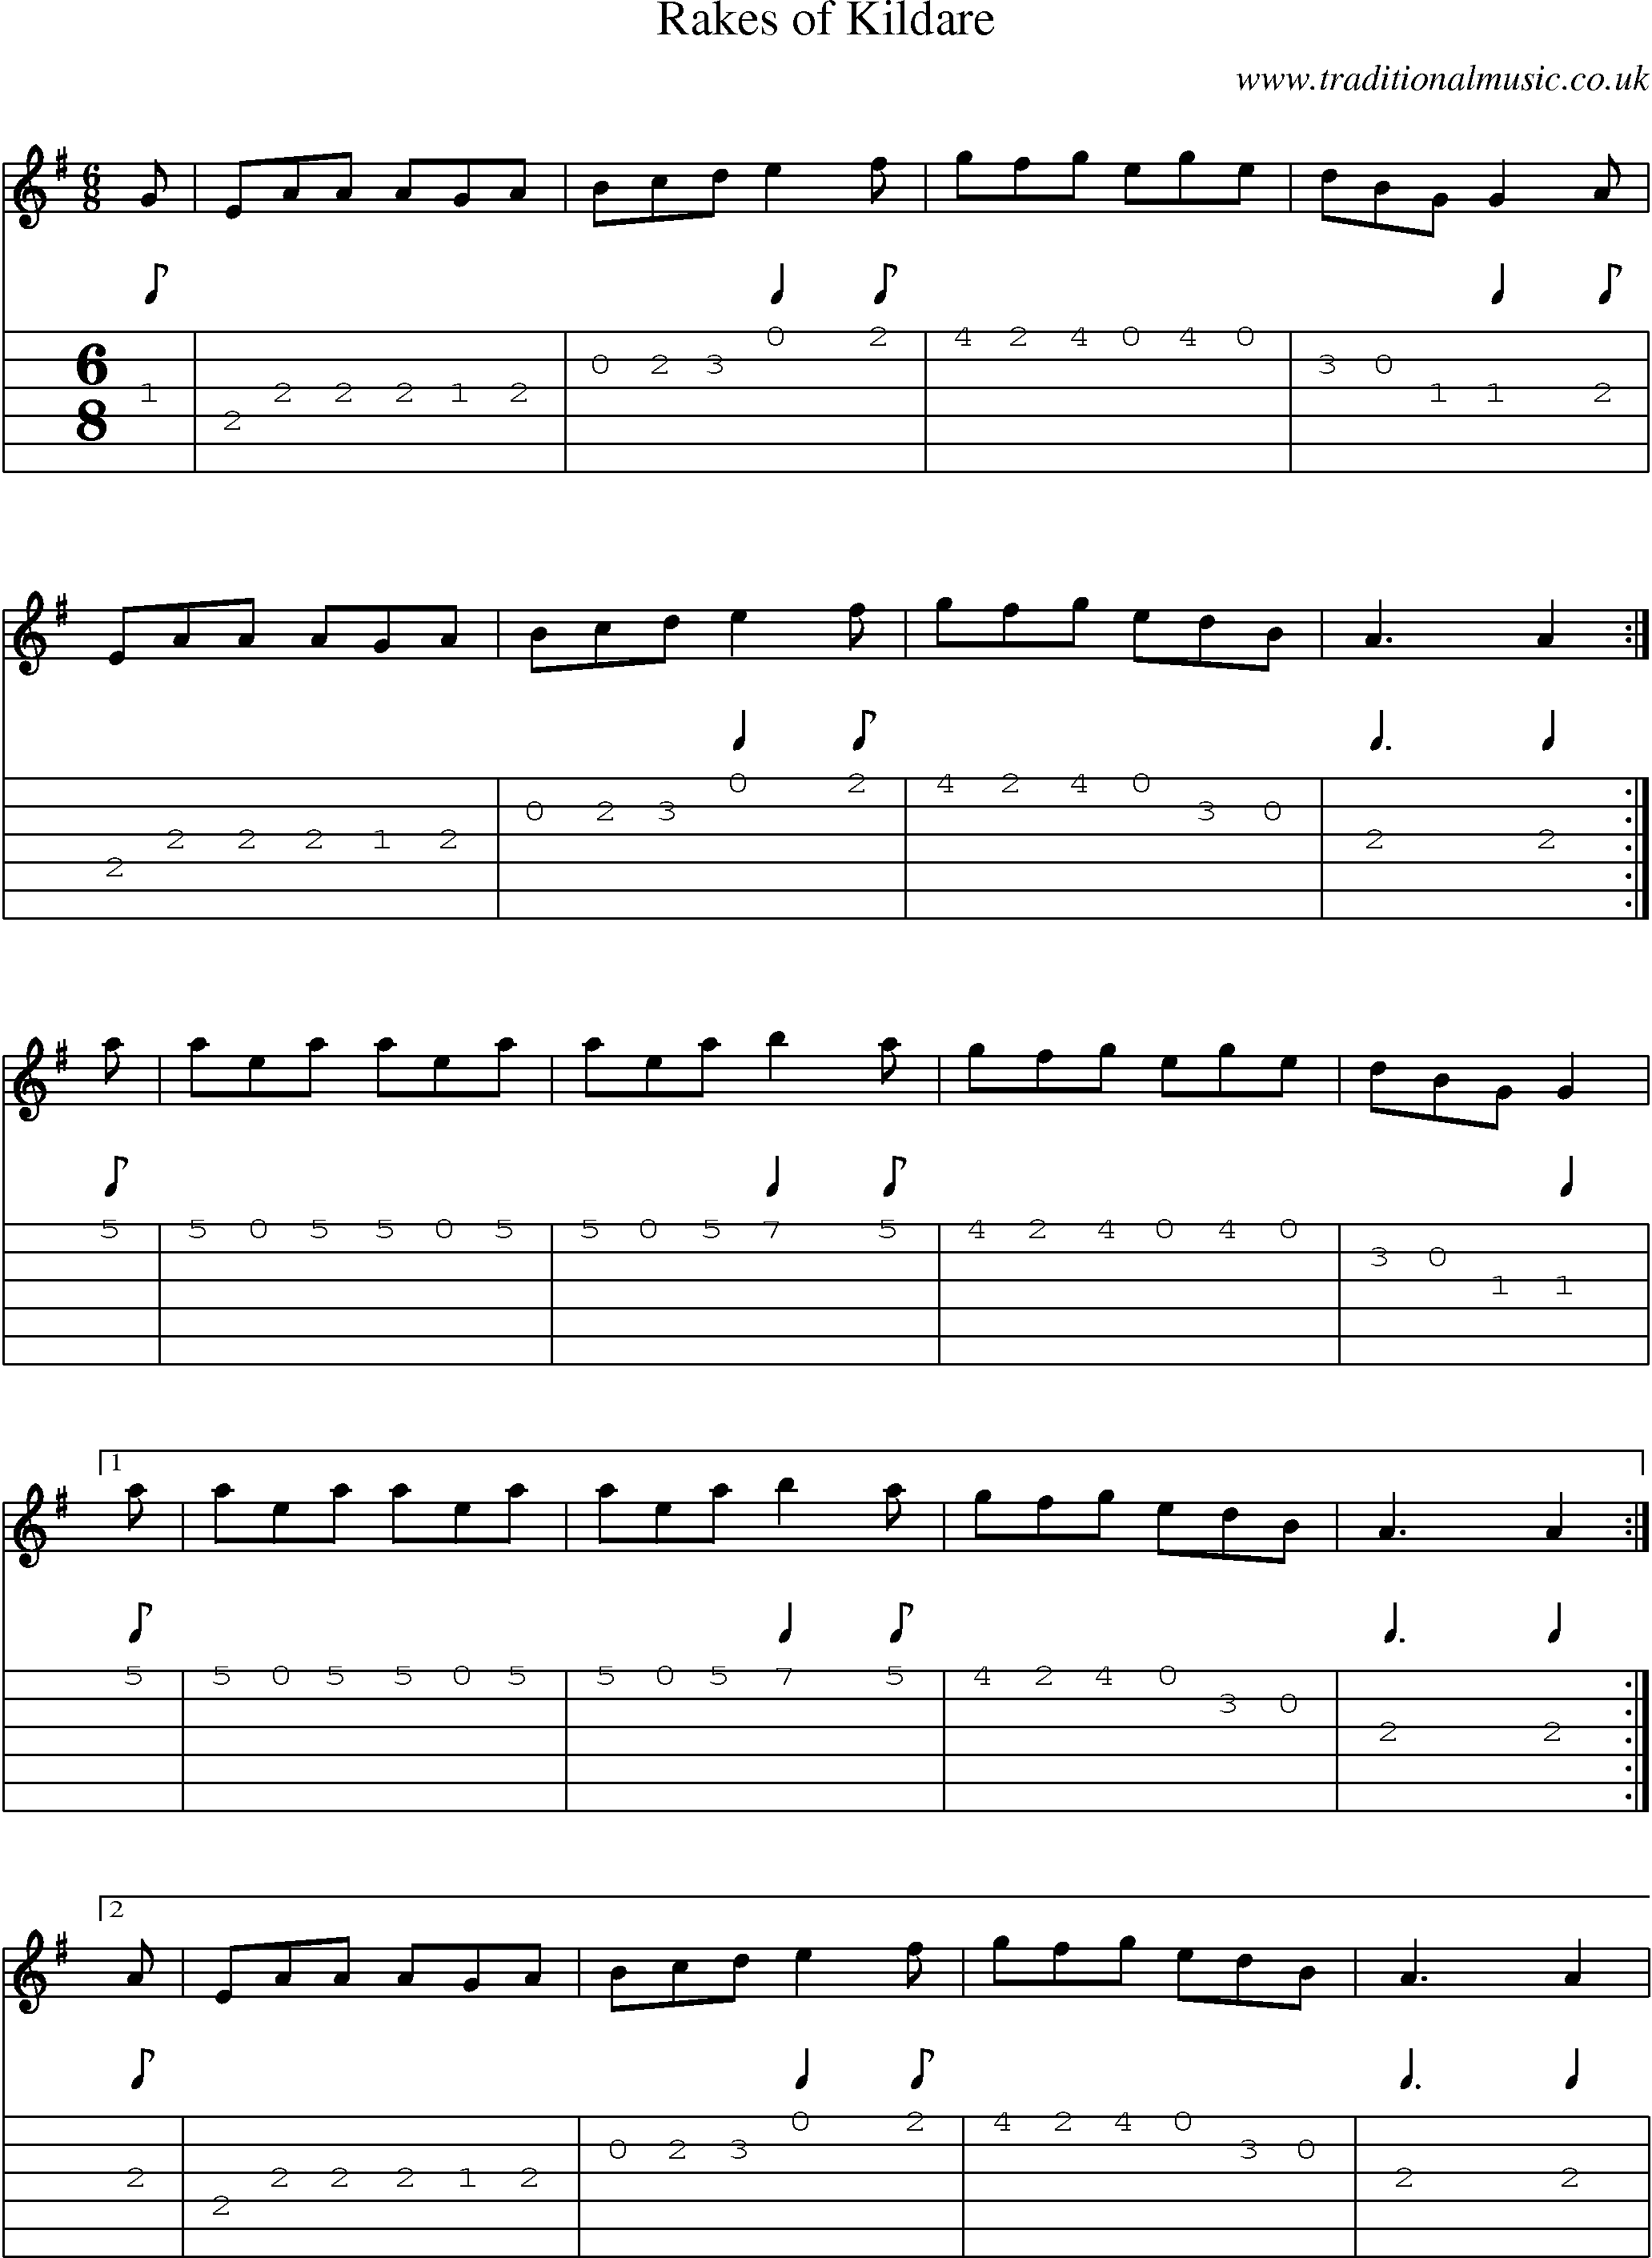 Music Score and Guitar Tabs for Rakes Of Kildare